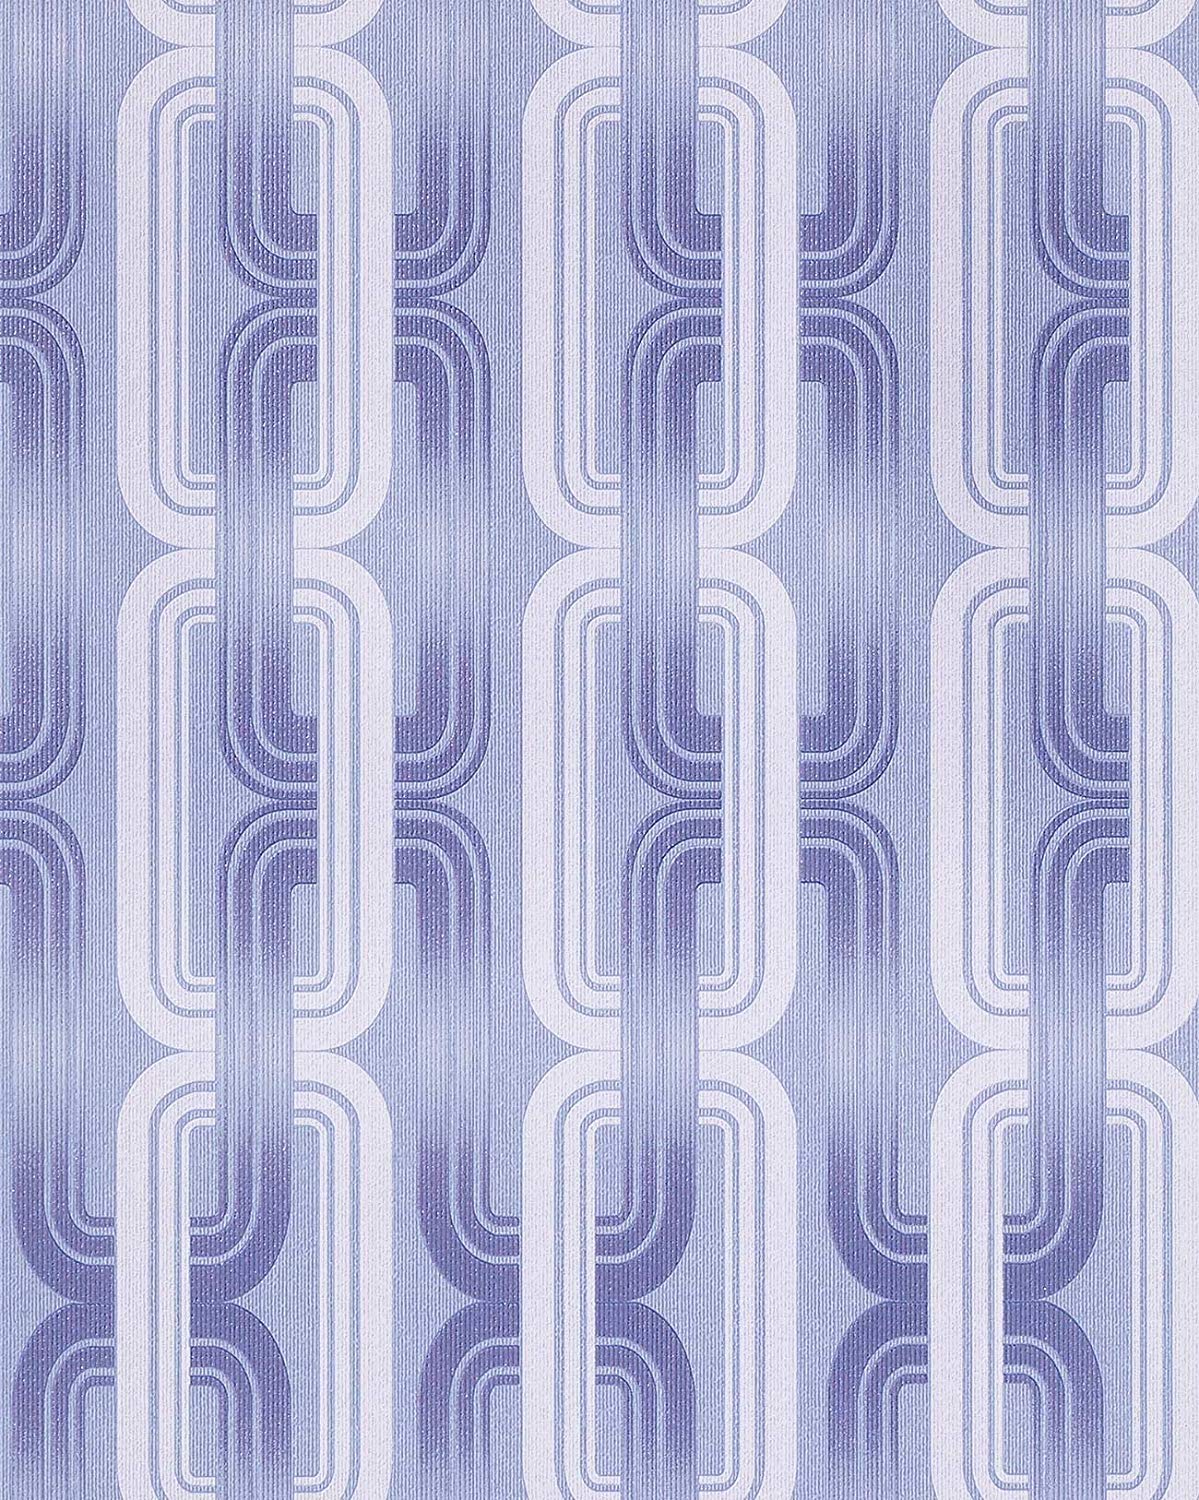 Retro 70s Style Wallpaper Wall EDEM 038 22 Graphical Pattern Pastel